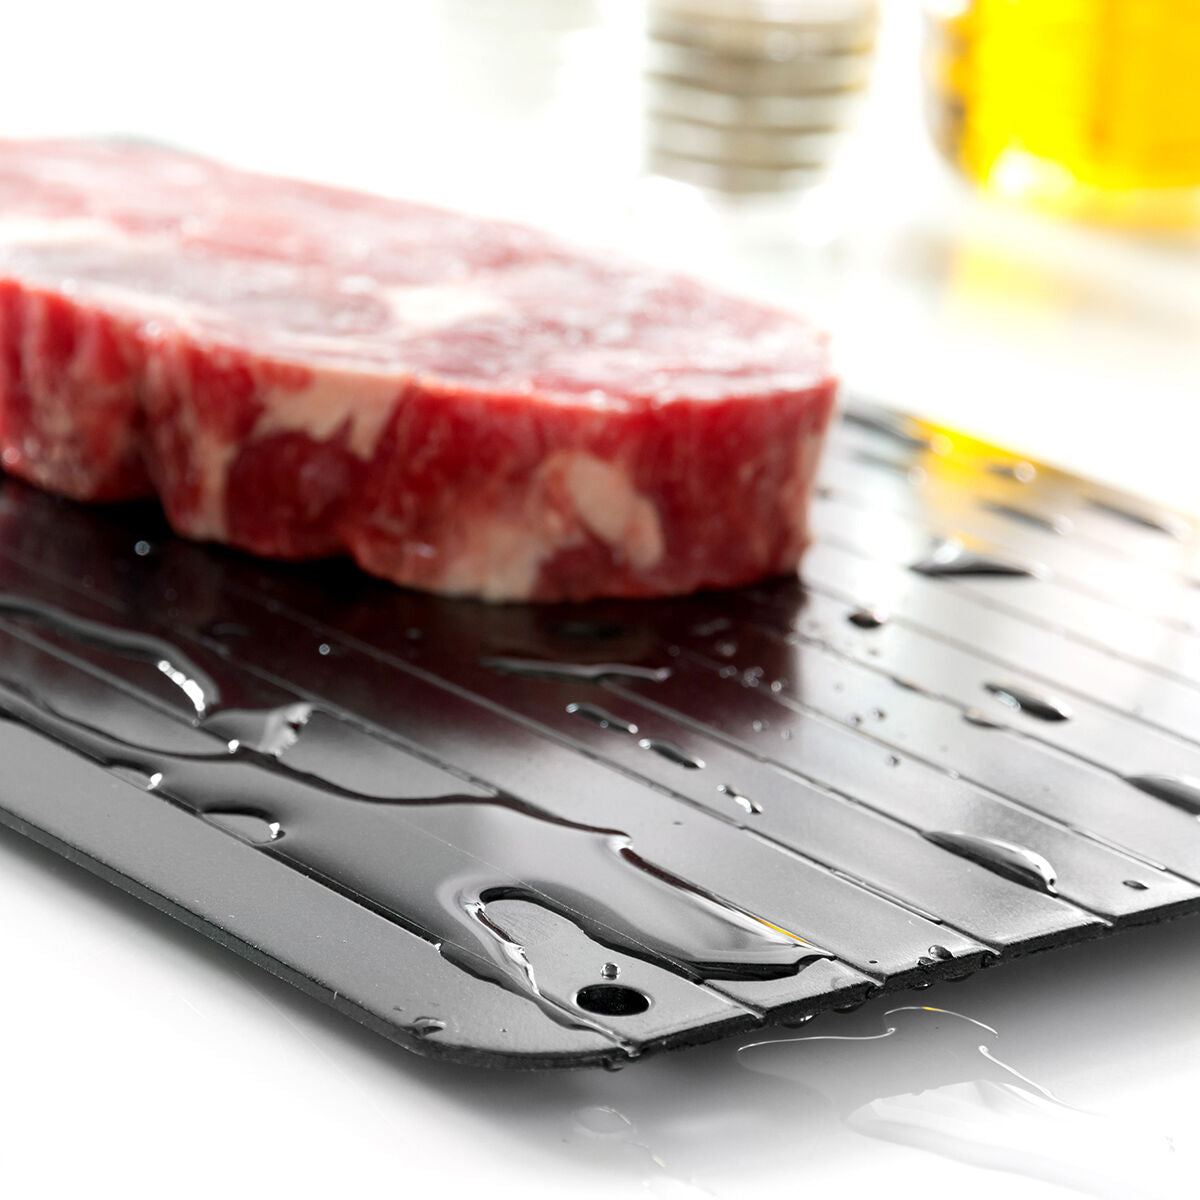 InnovaGoods Quick Defrosting Plate